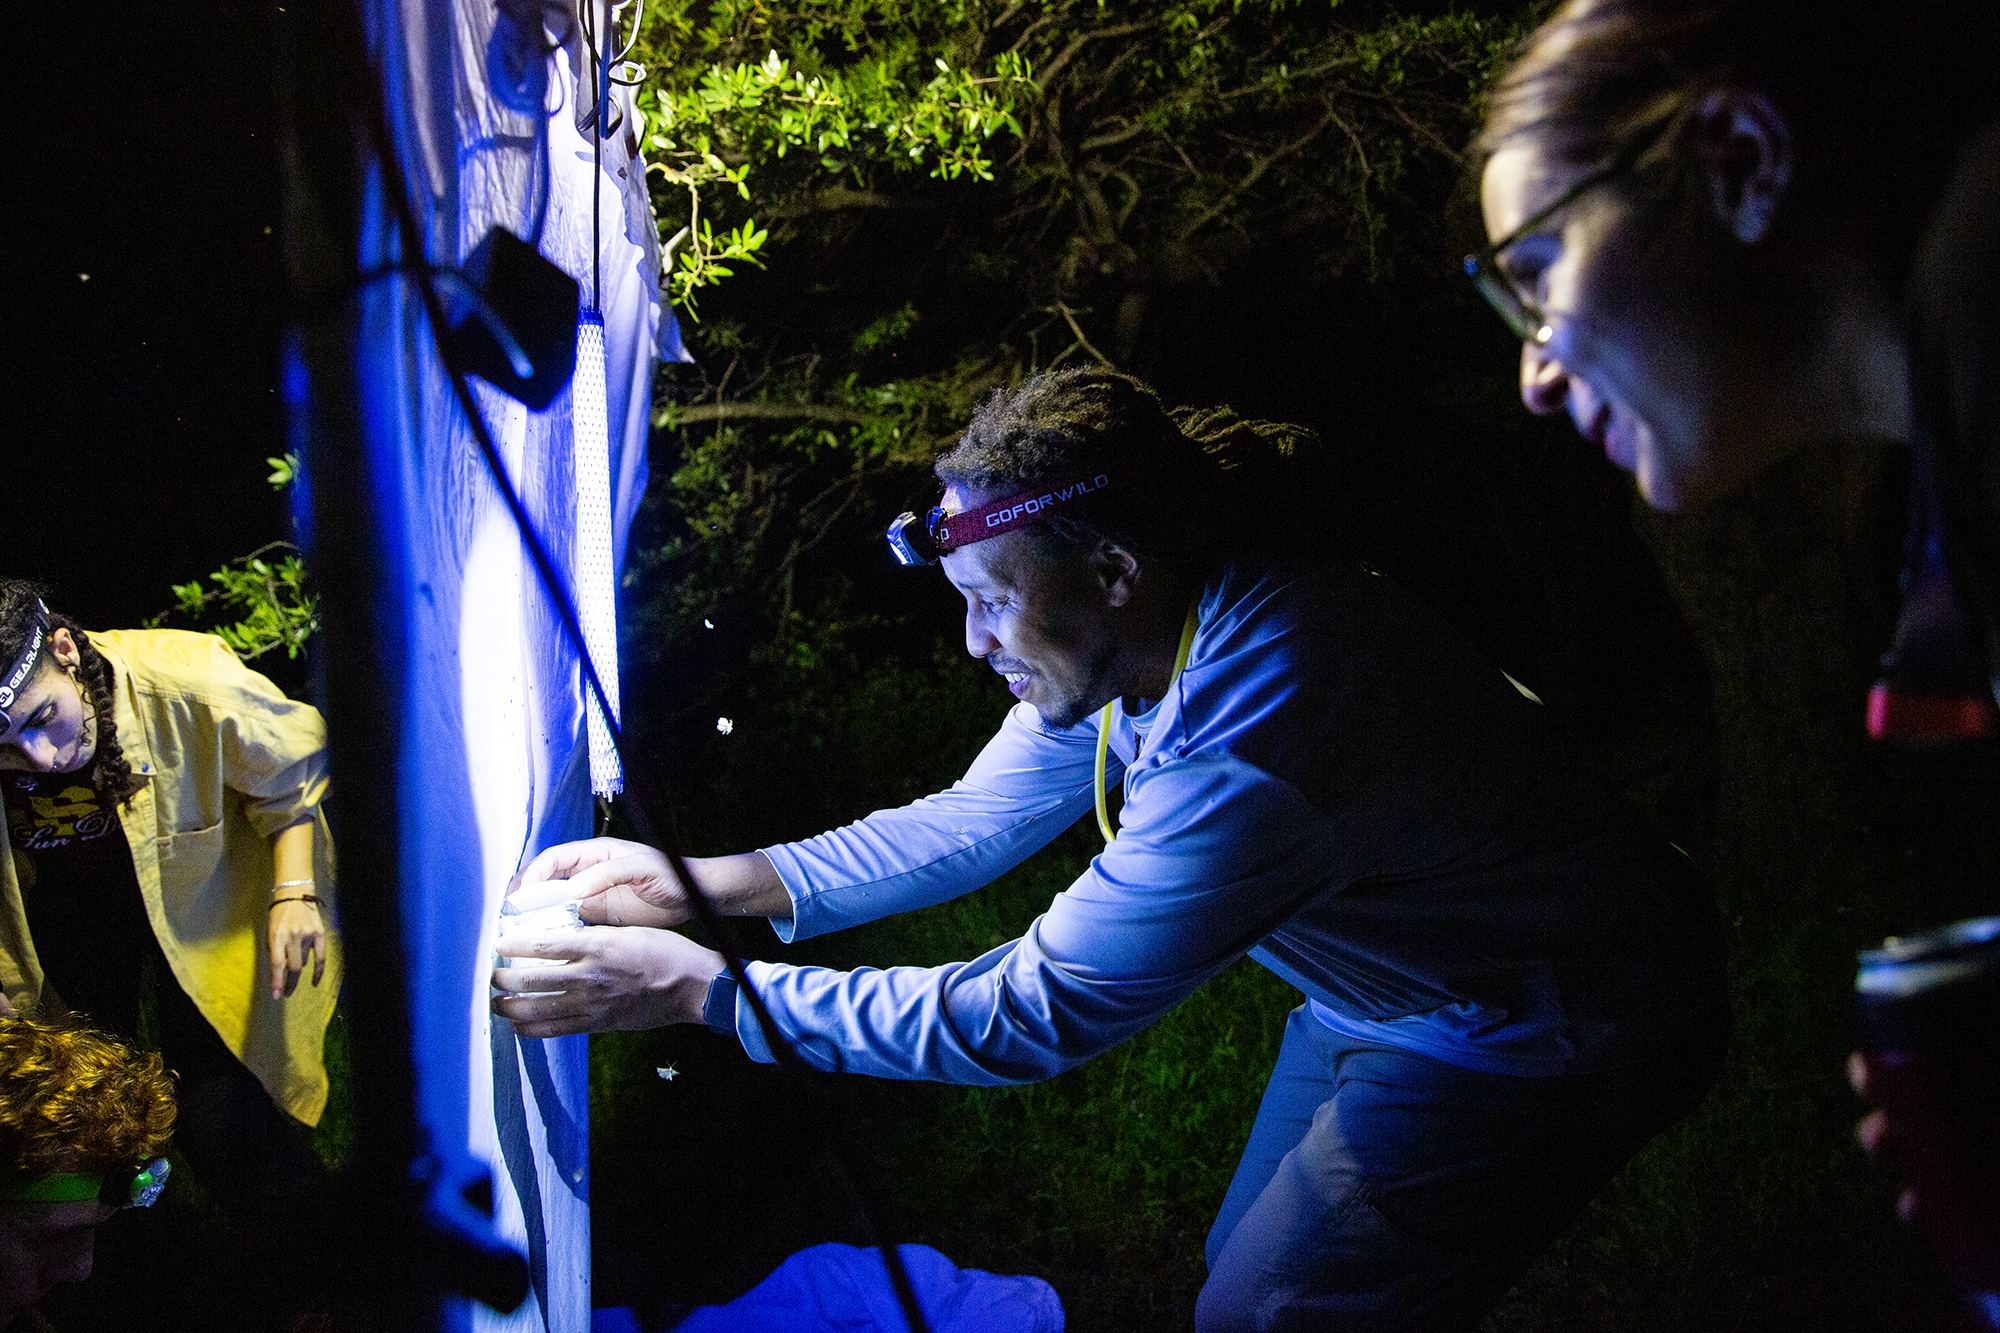 collecting insects at night